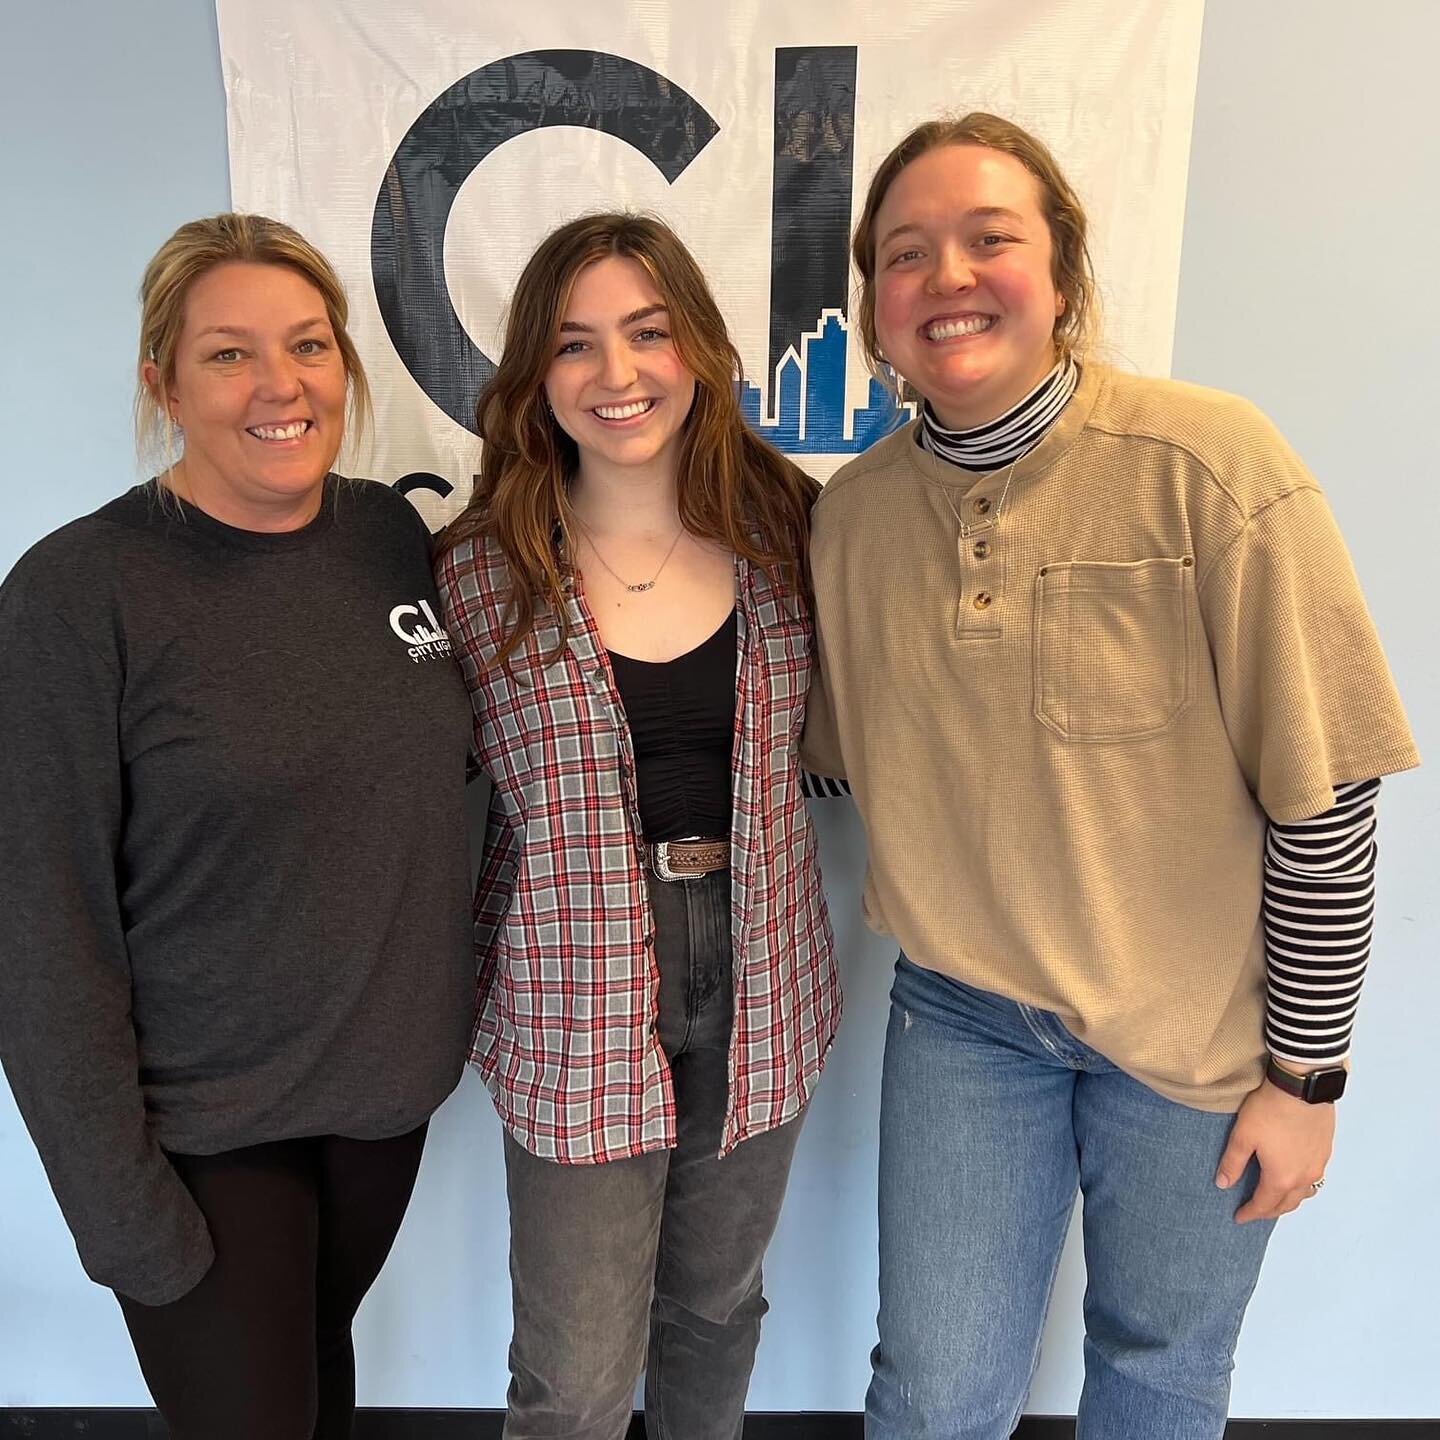 We are so grateful to have had an incredible social work intern with us over the last semester! Thank you, Sheridan, for all you did for City Lights and the people we walk with. You will be so missed!

Read below to hear what our Community Director, 